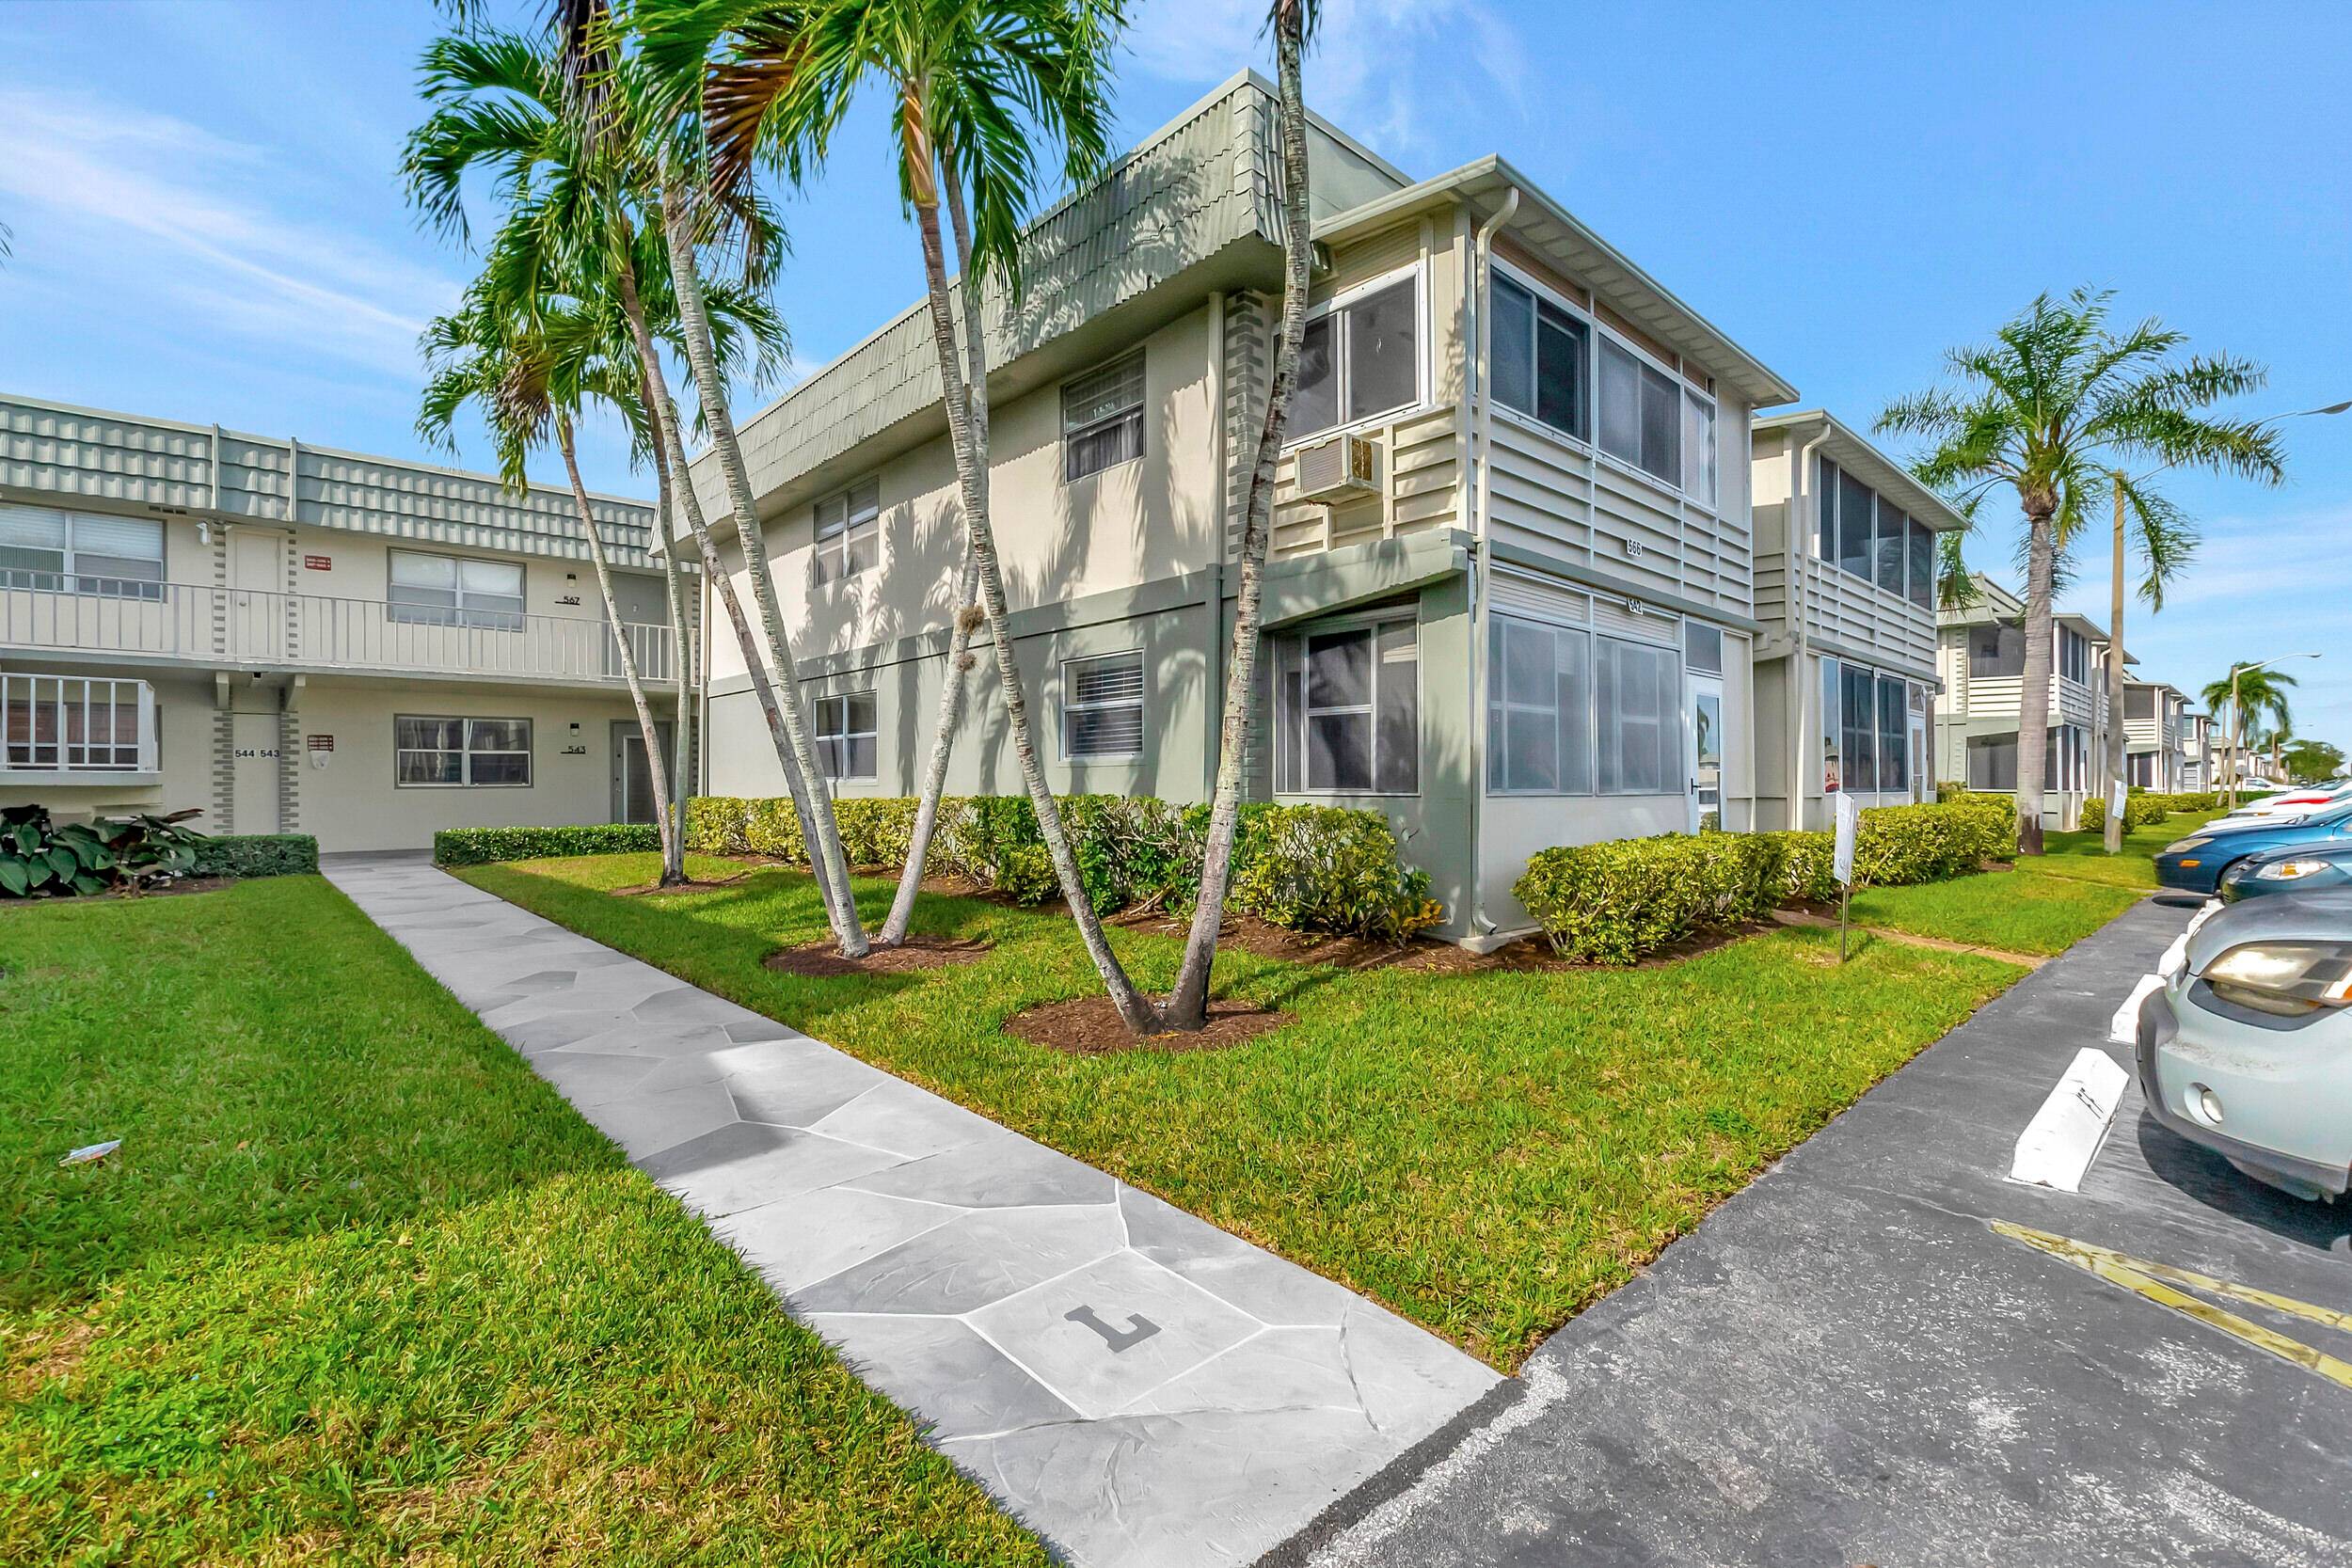 Experience the charm of Delray Beach Living in this fully furnished, second floor 1 bedroom, 1.